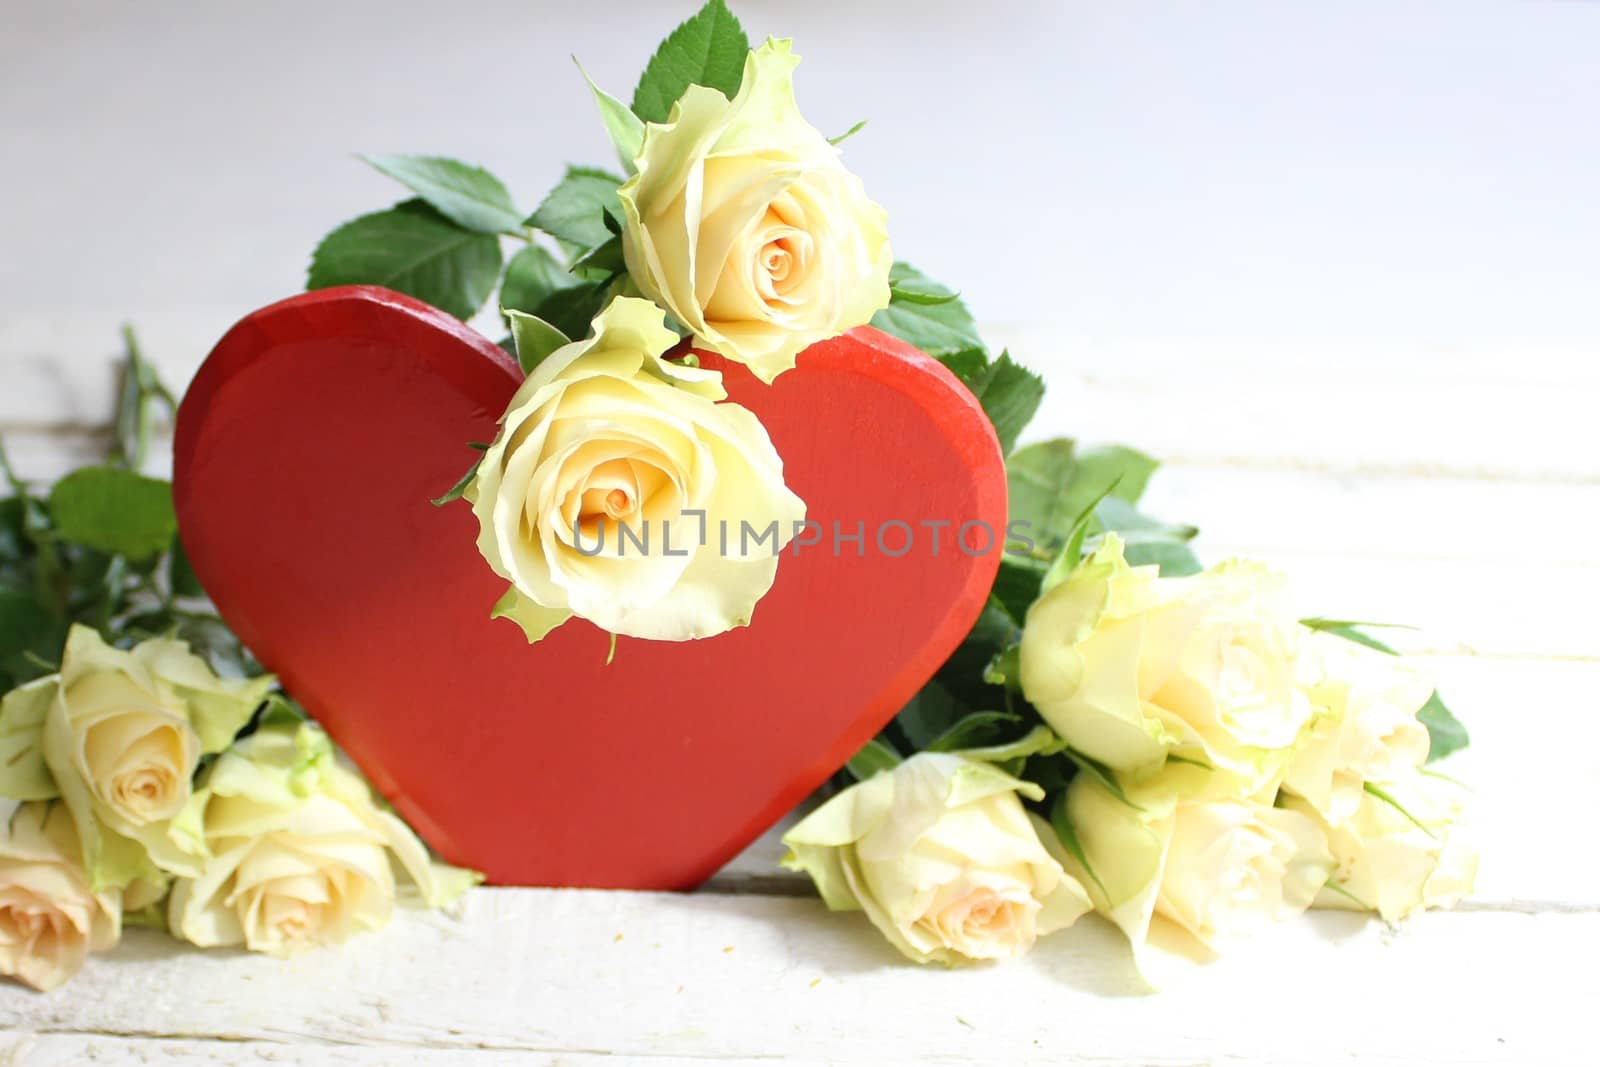 The picture shows a red heart and white roses.